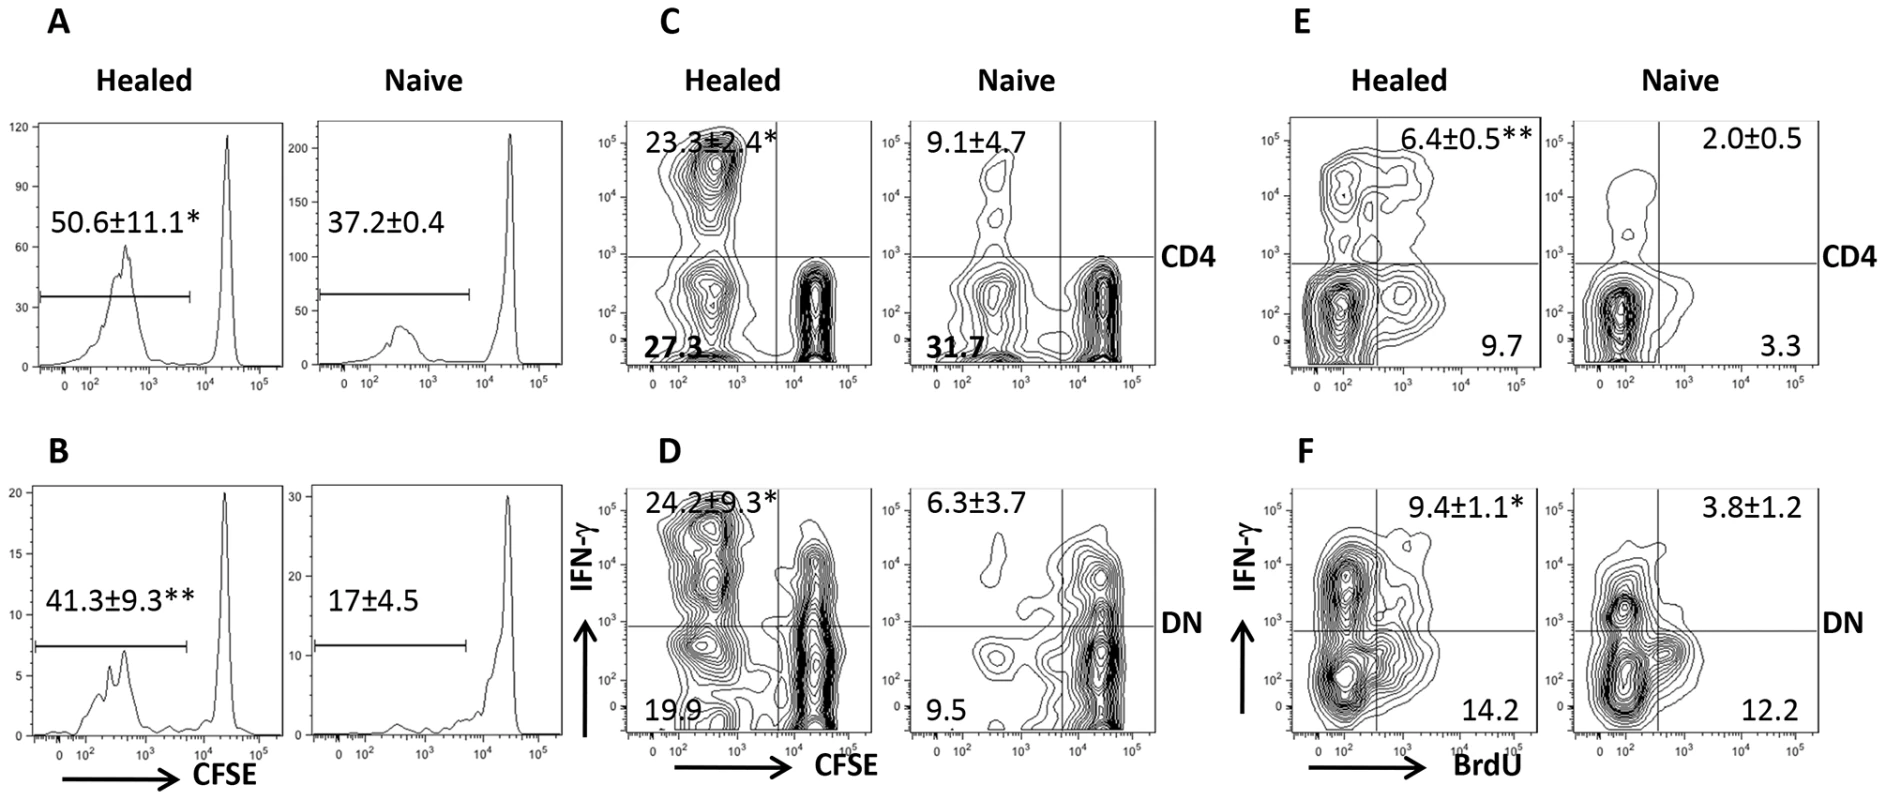 DN T cells proliferate and produce IFN-γ <i>in vivo</i>.